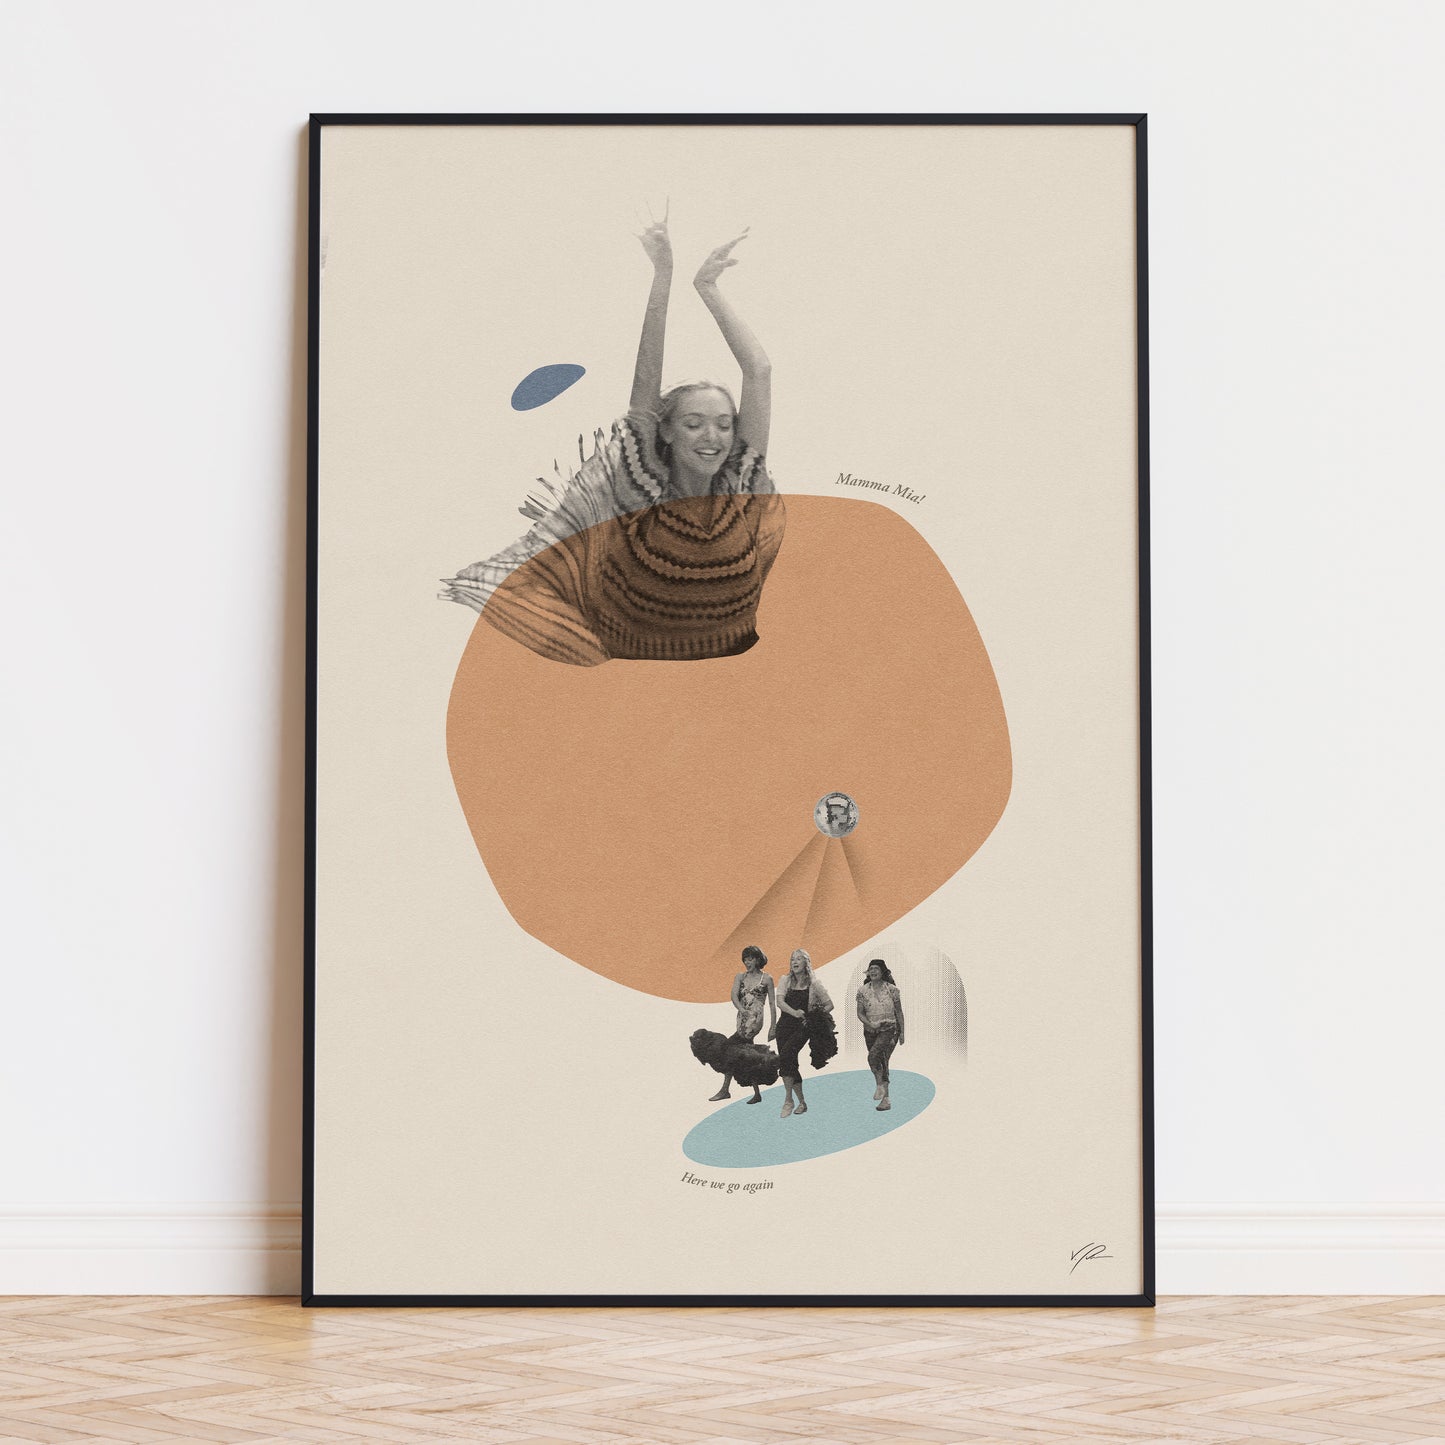 A minimalistic Mamma Mia movie print art featuring the main characters dancing